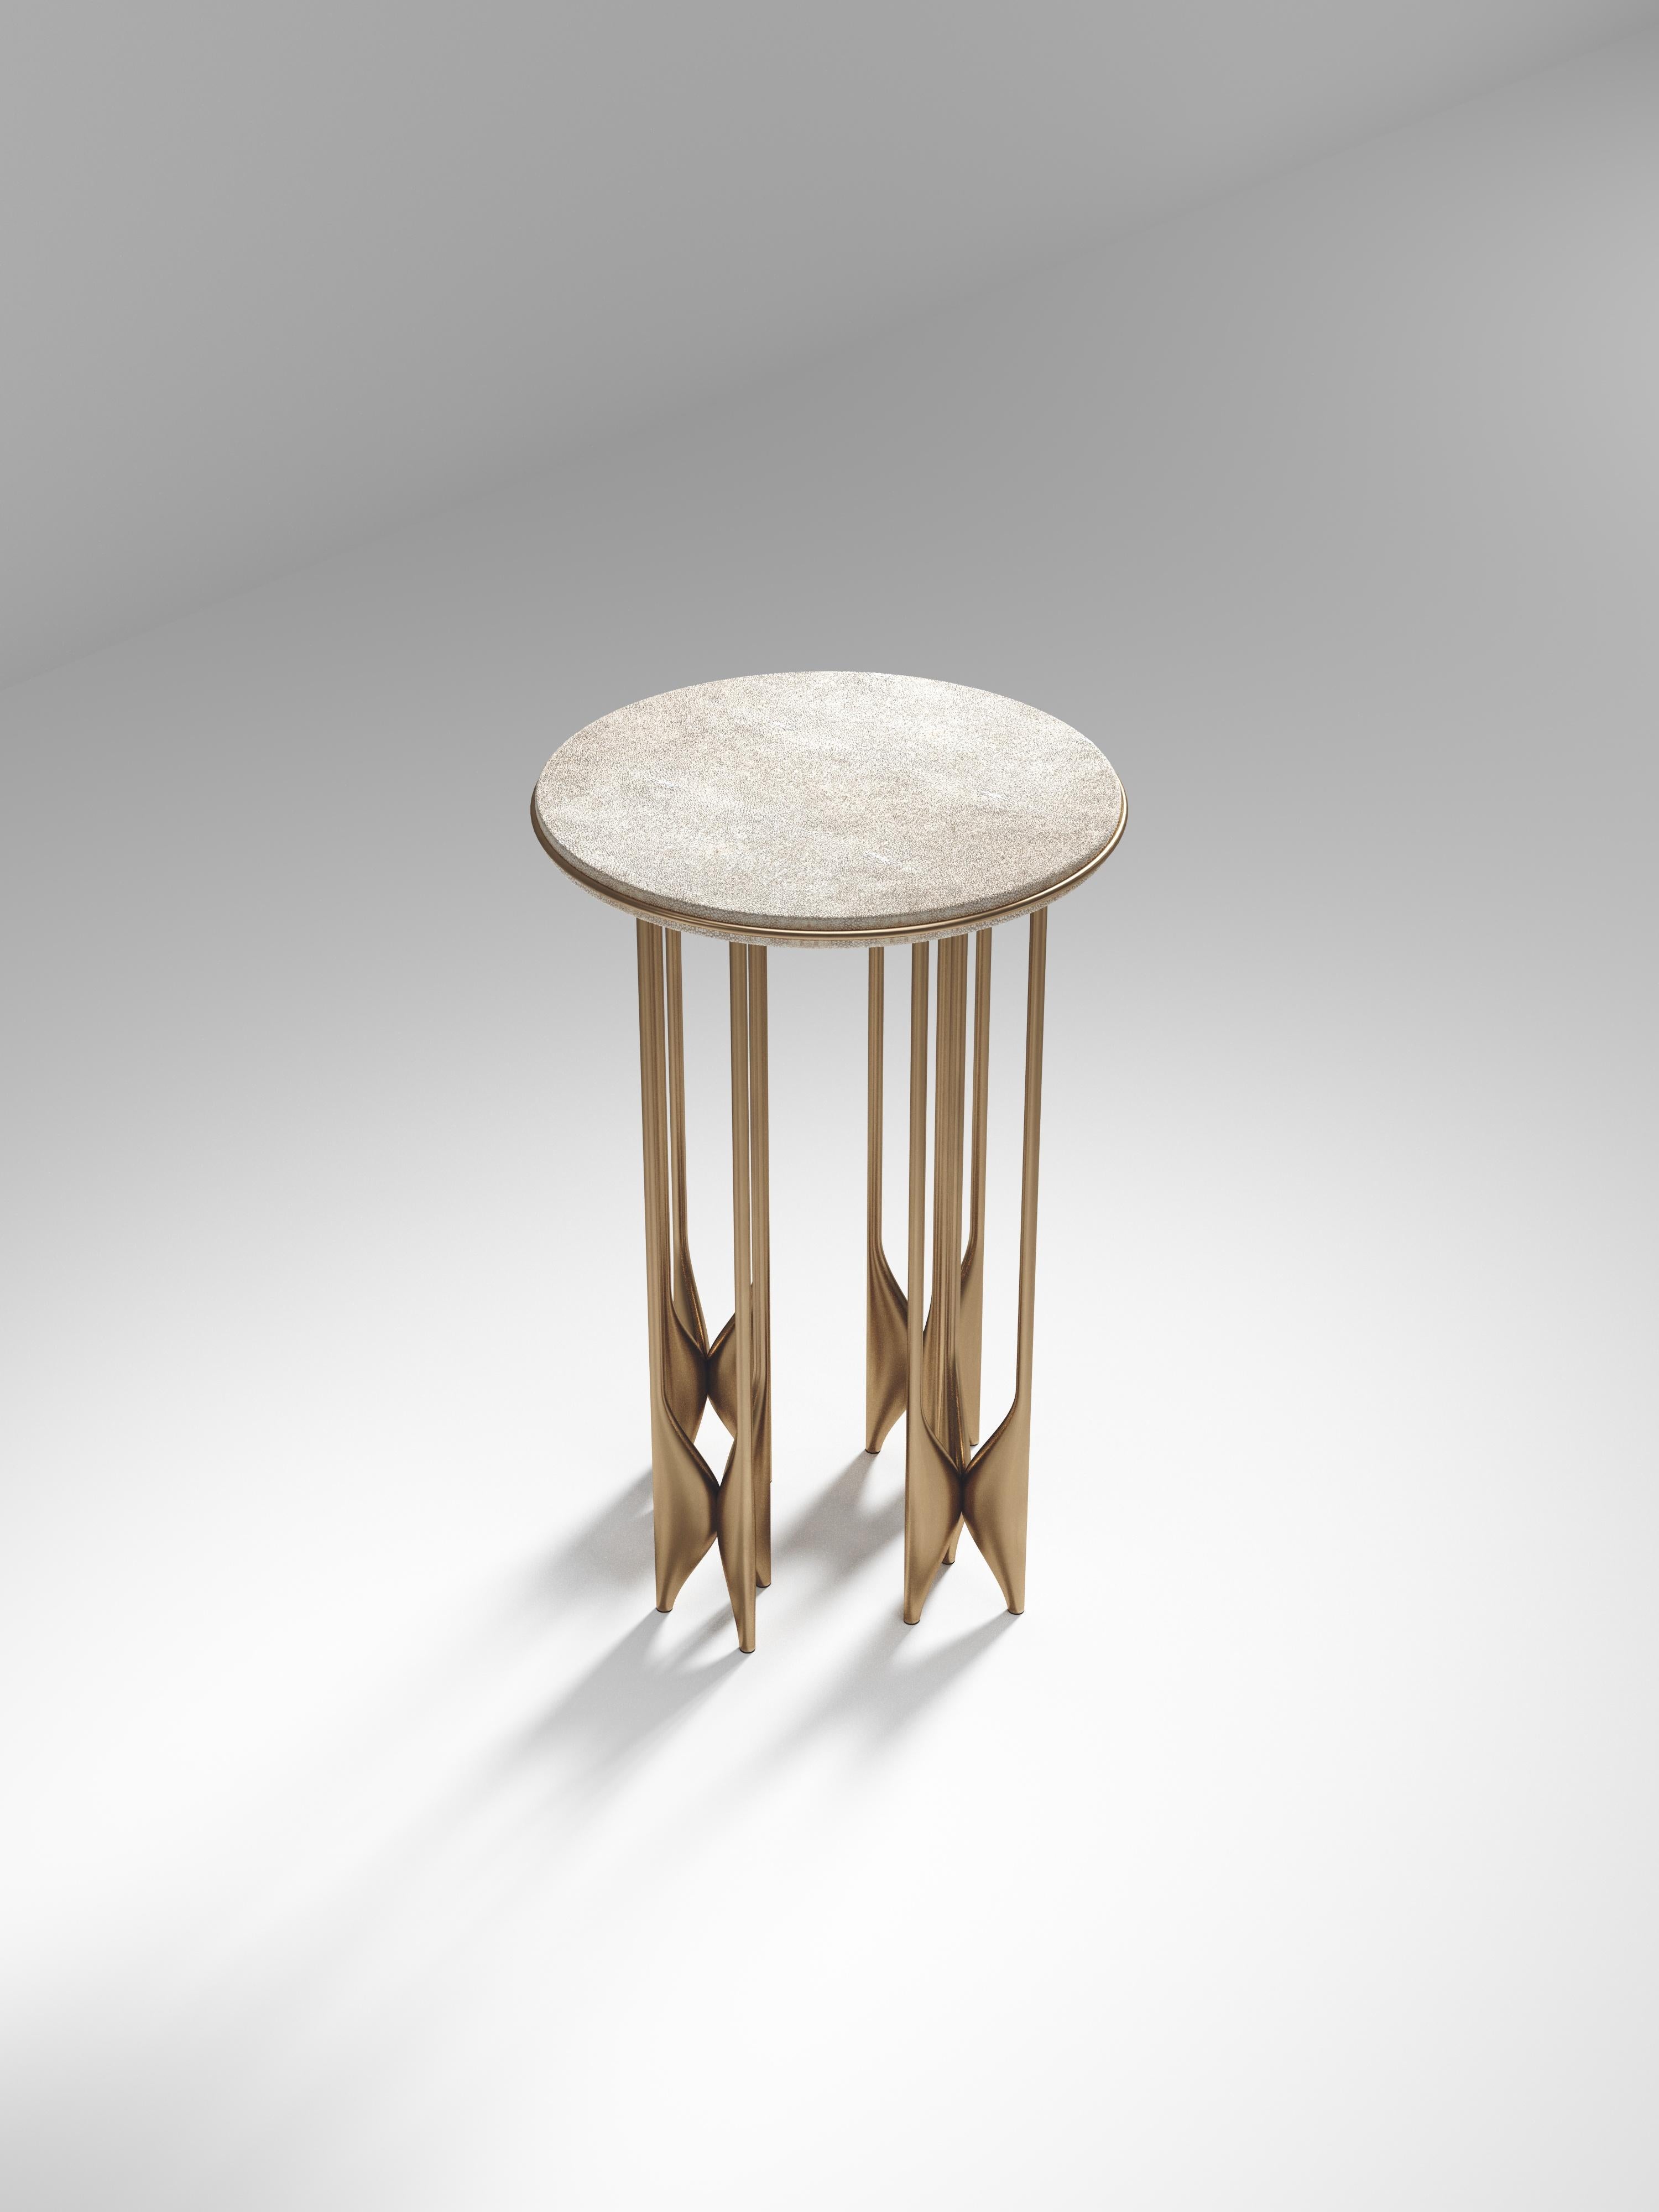 The Plumeria Side Table by Kifu Paris is a dramatic and sculptural piece. The cream shagreen inlaid top sits on clusters of bronze-patina brass legs that are conceptually inspired by bird feathers floating on top of a lake. The border of the top is